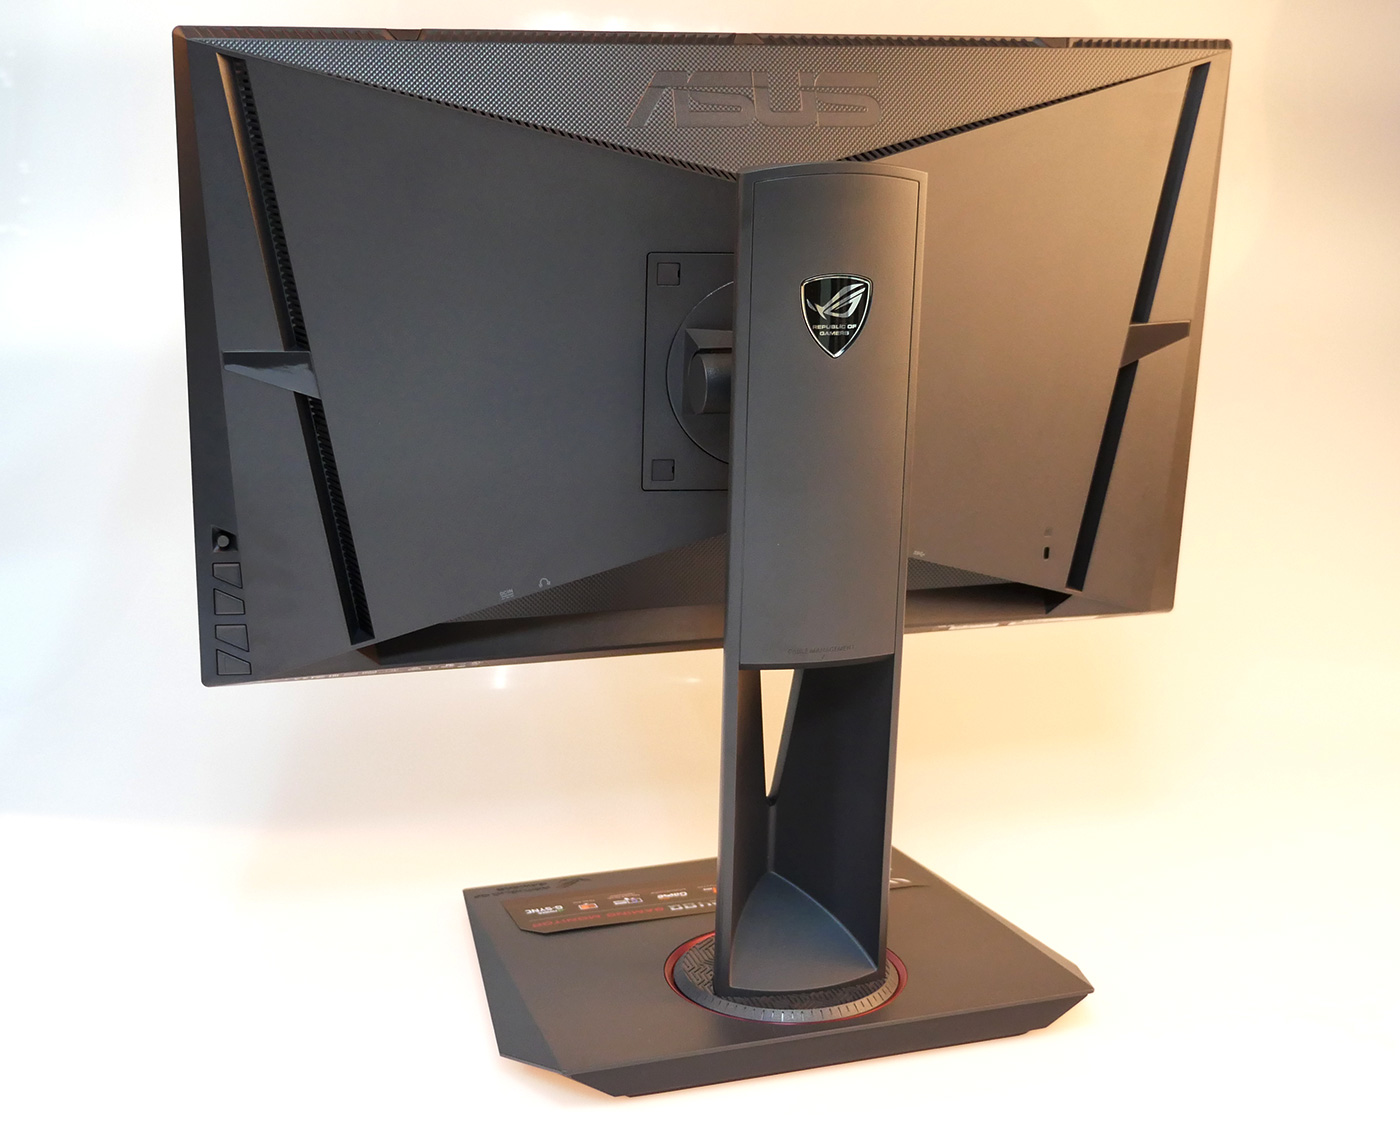 Unboxing the ROG Swift PG248Q 180Hz Gaming Monitor